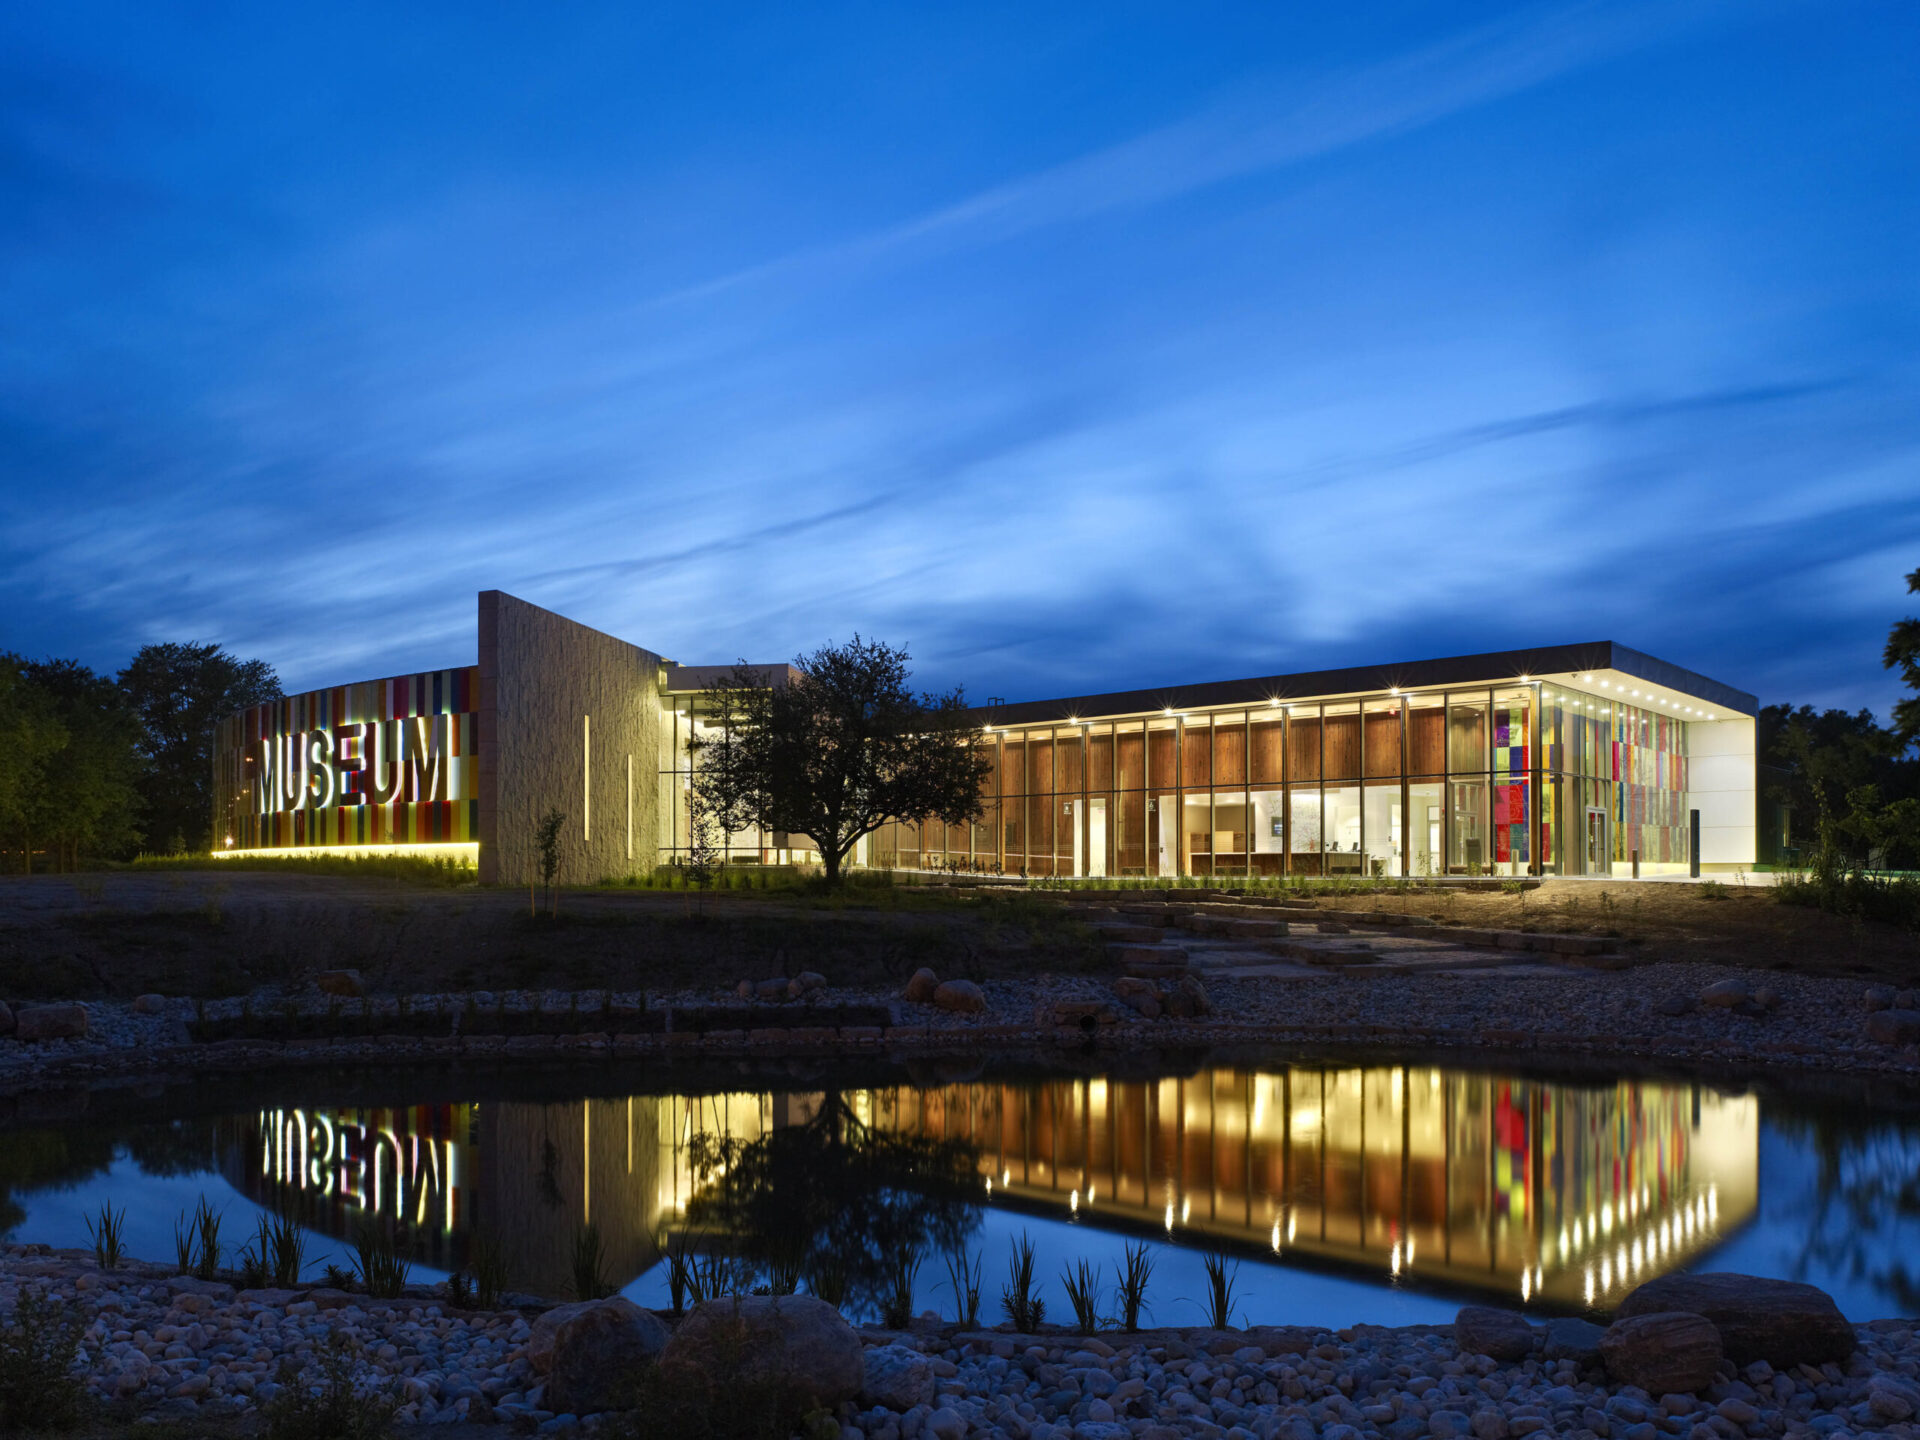 A architecturally-engineered building lit up at night with a reflection in a pond.